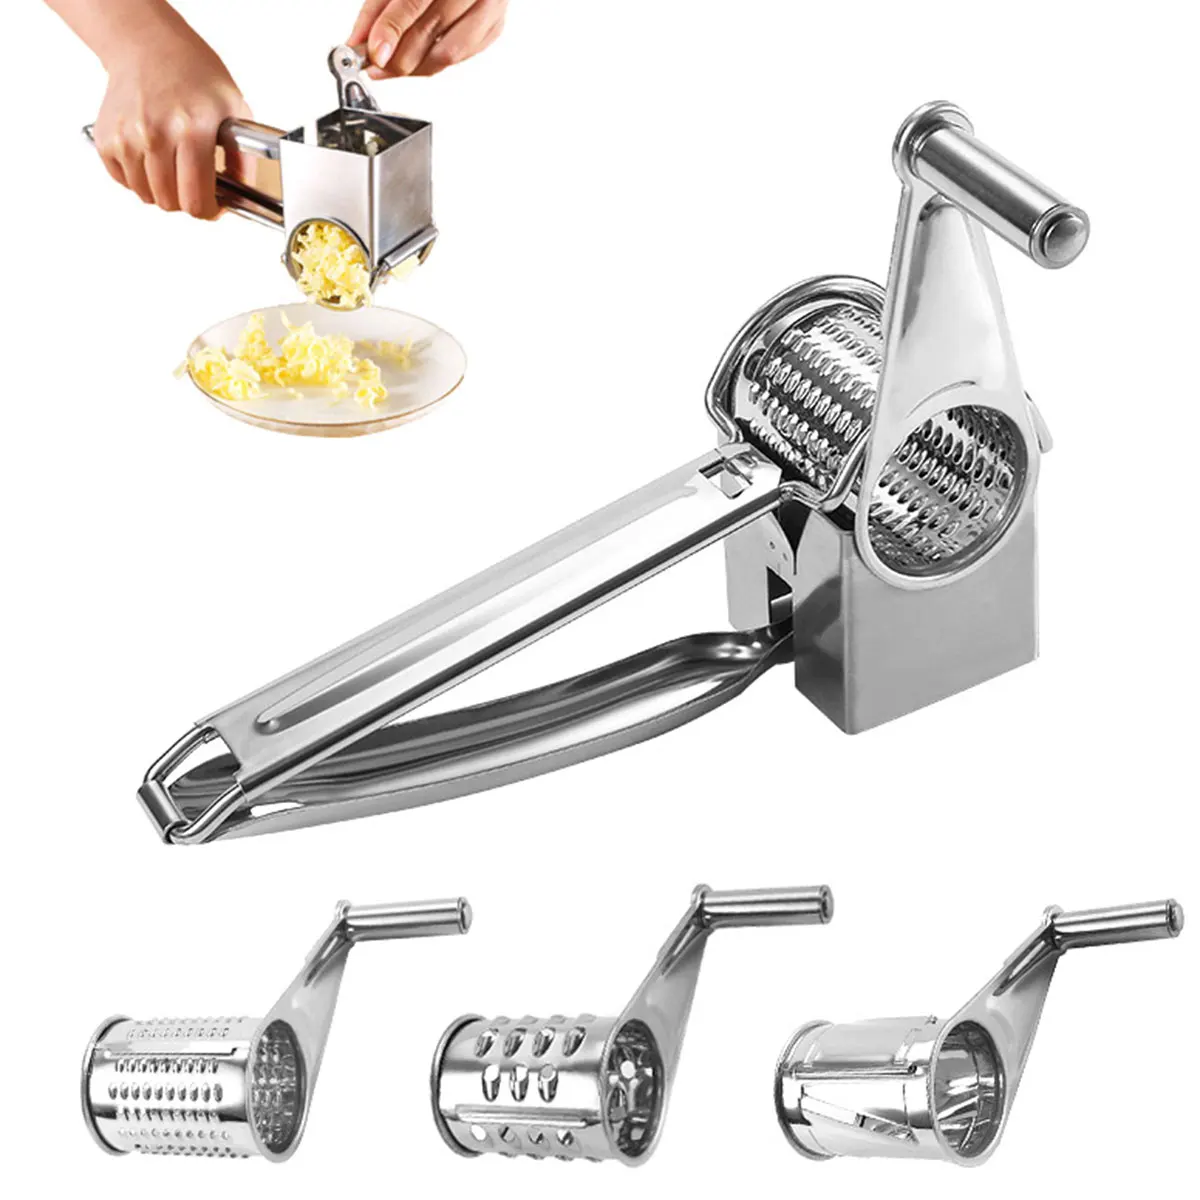 https://ae01.alicdn.com/kf/S6381db3ae7e54ffbb78f3ea2cb246591S/Rotary-Cheese-Grater-with-handle-3-Interchangeable-Drum-Blades-Cheese-Grater-Slicer-Handheld-Cheese-Cutter-Shredder.jpg